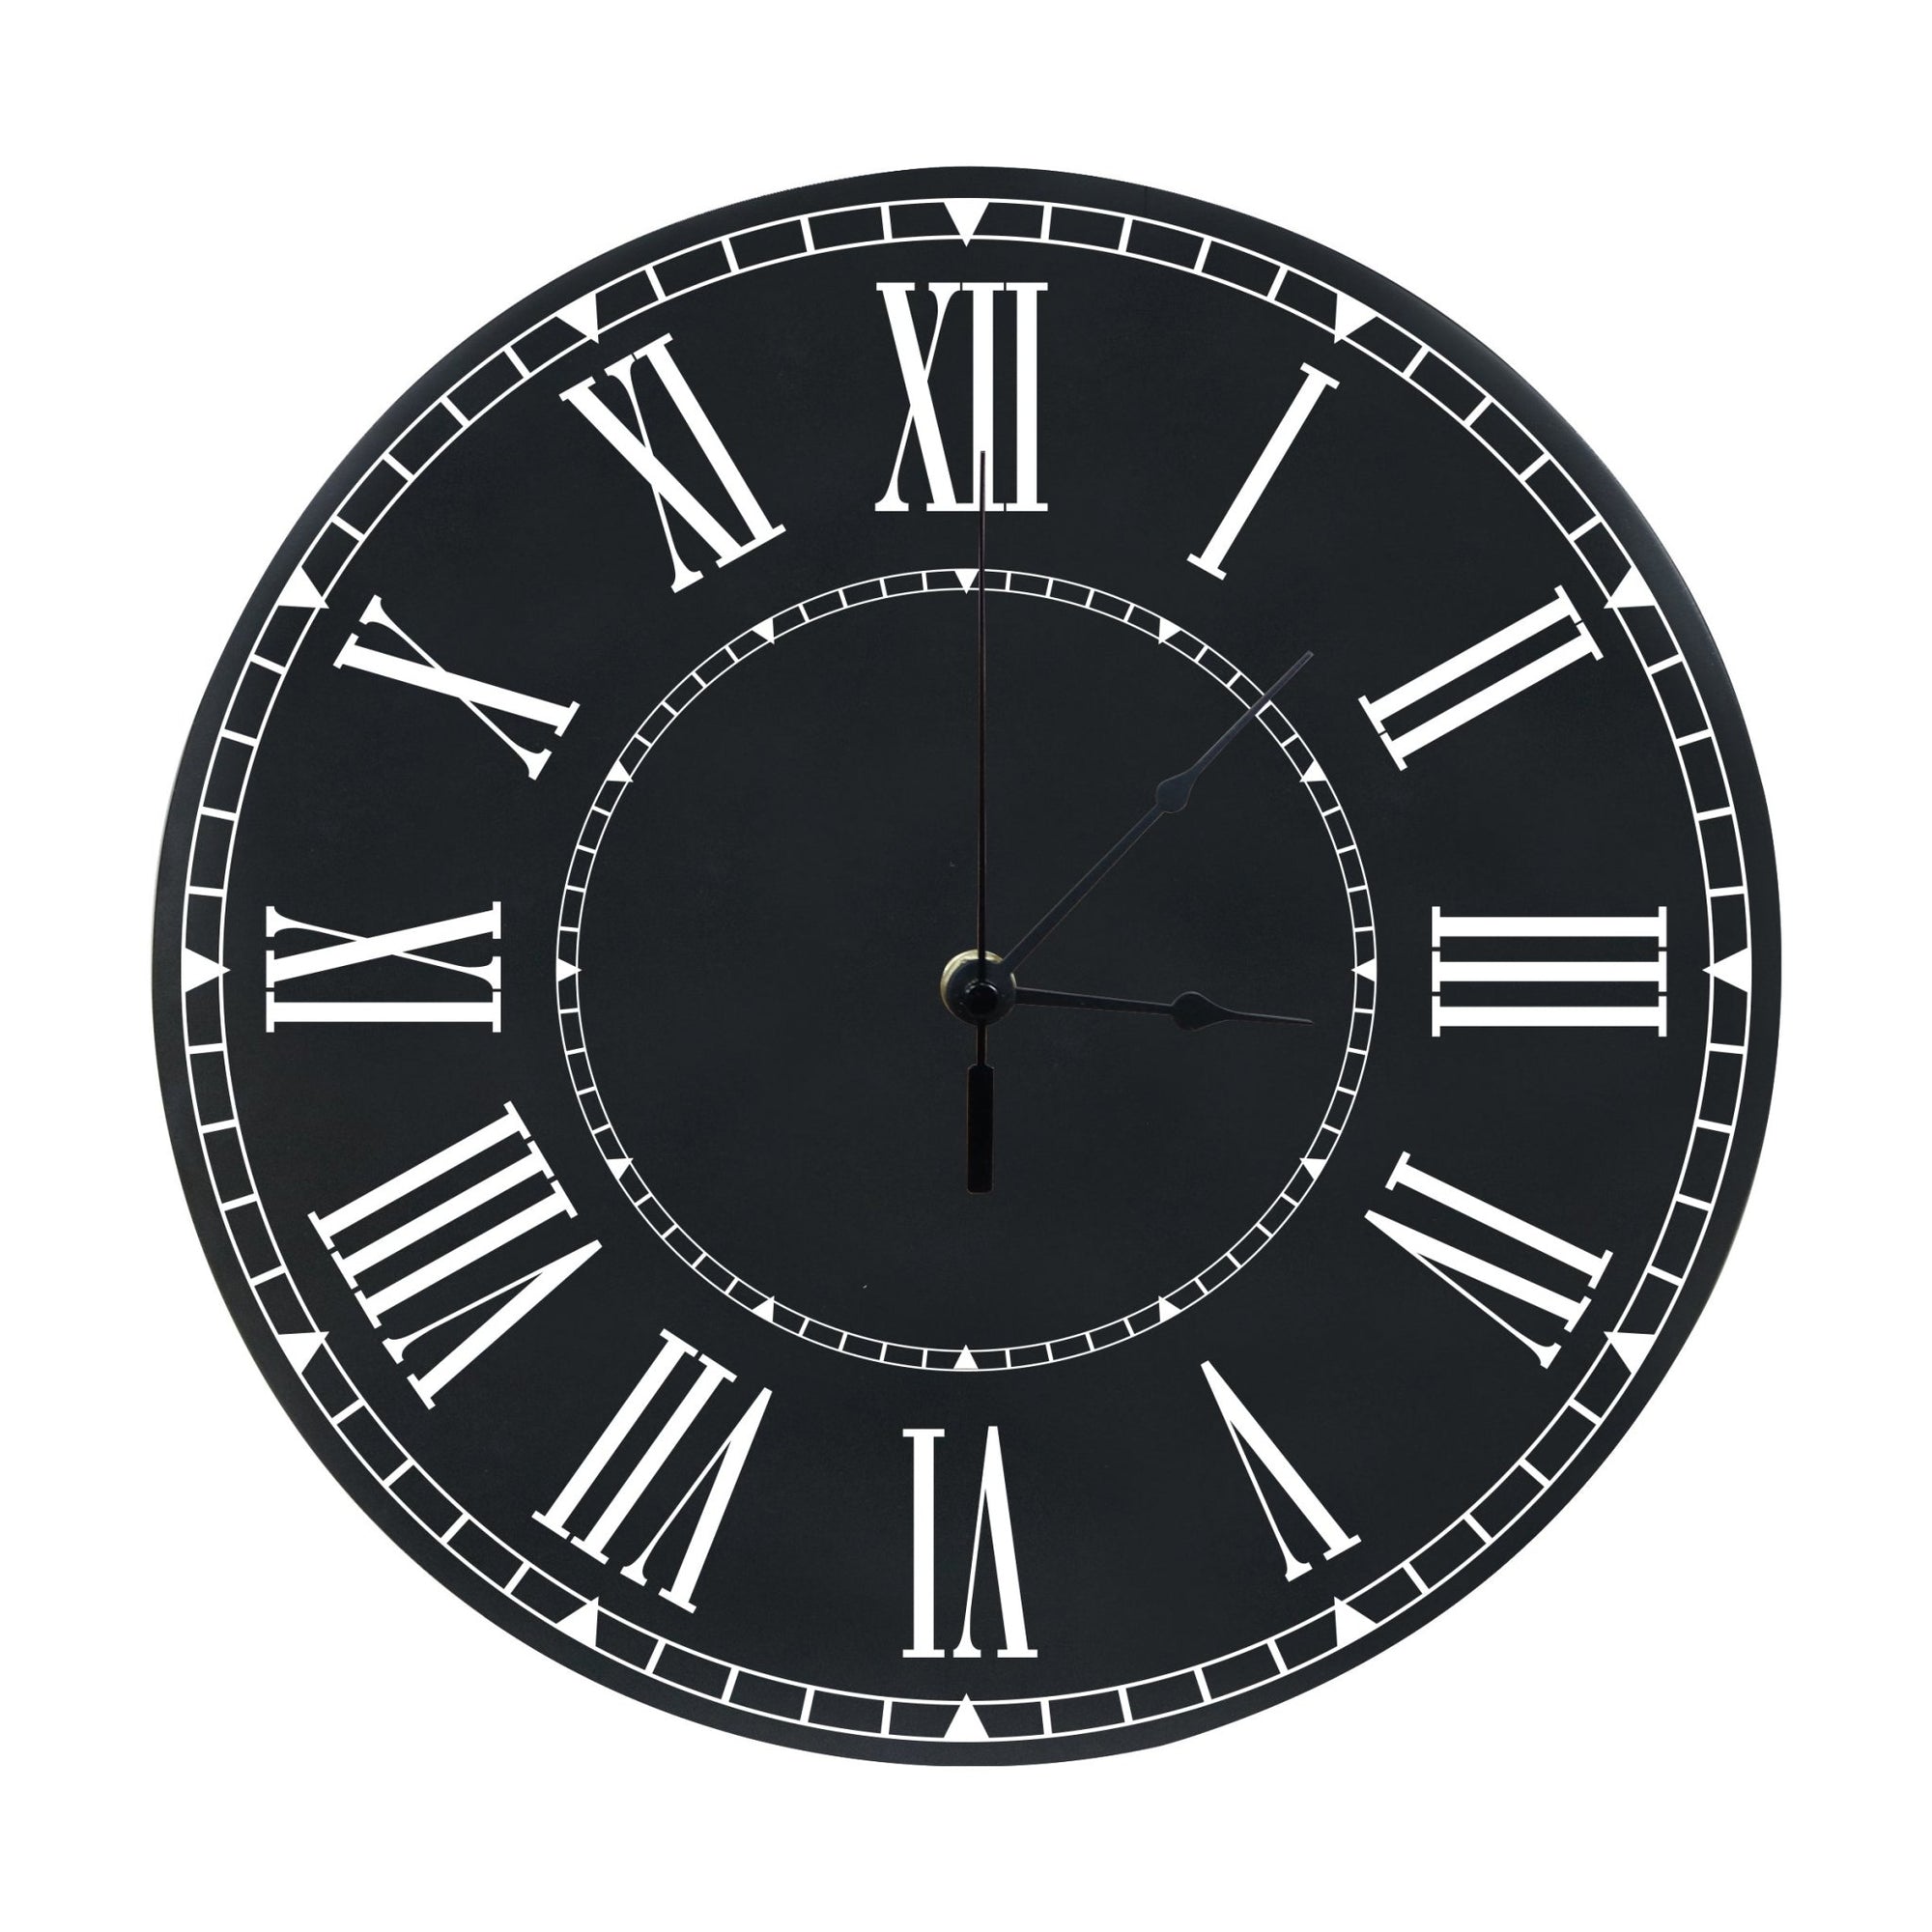 Everyday Home and Family Clocks - Home Sweet Home - LifeSong Milestones